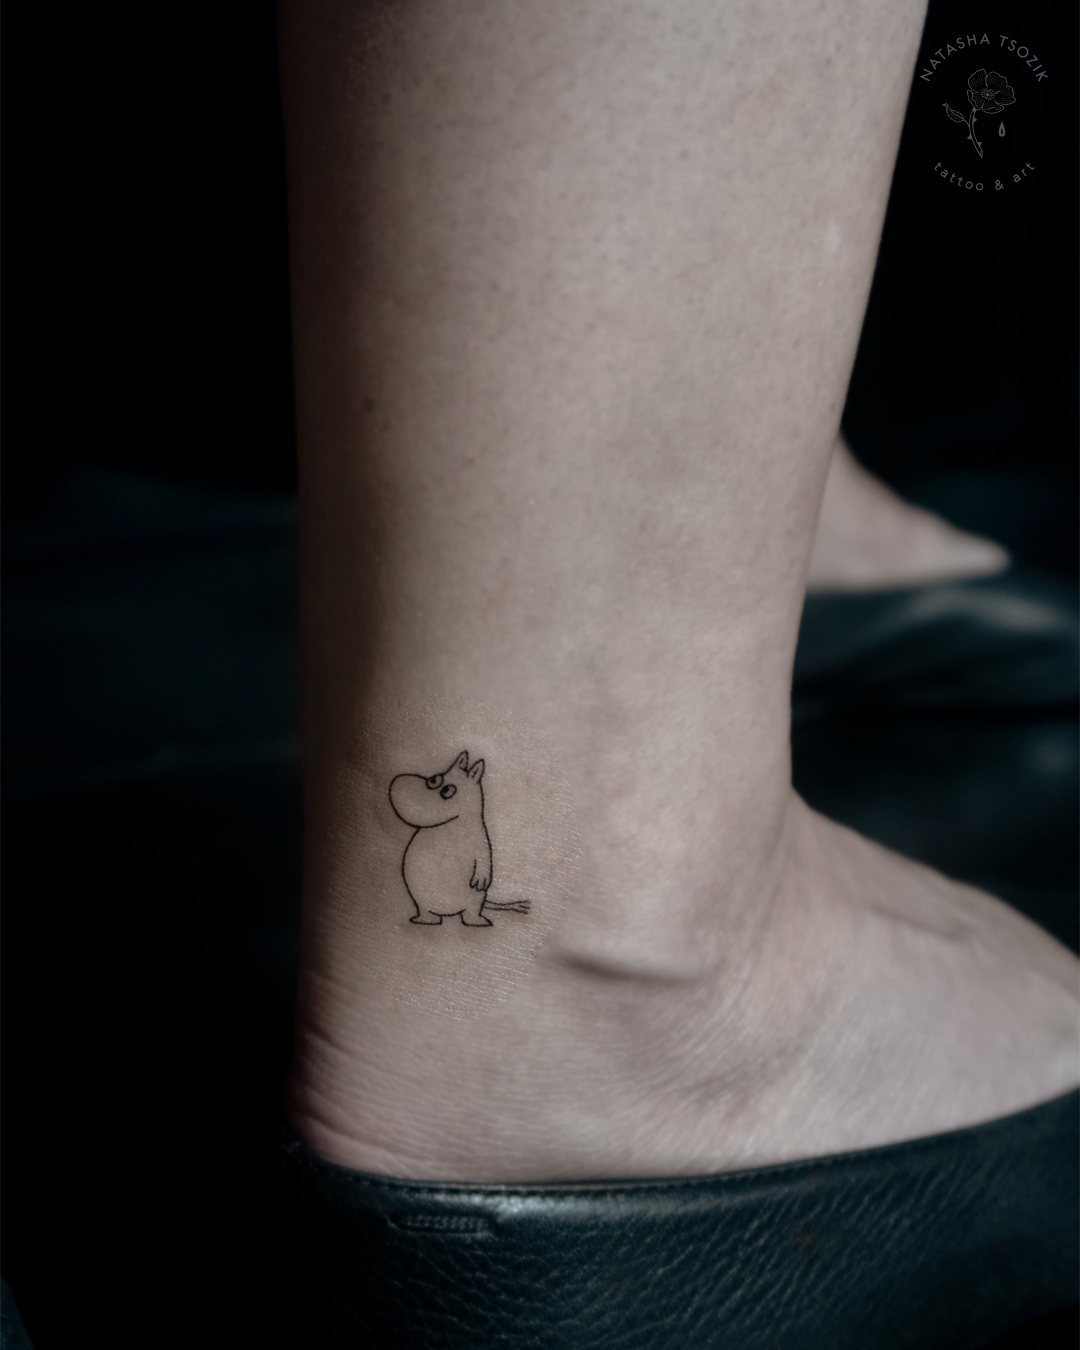 Small matching Moomin tattoo on ankle.